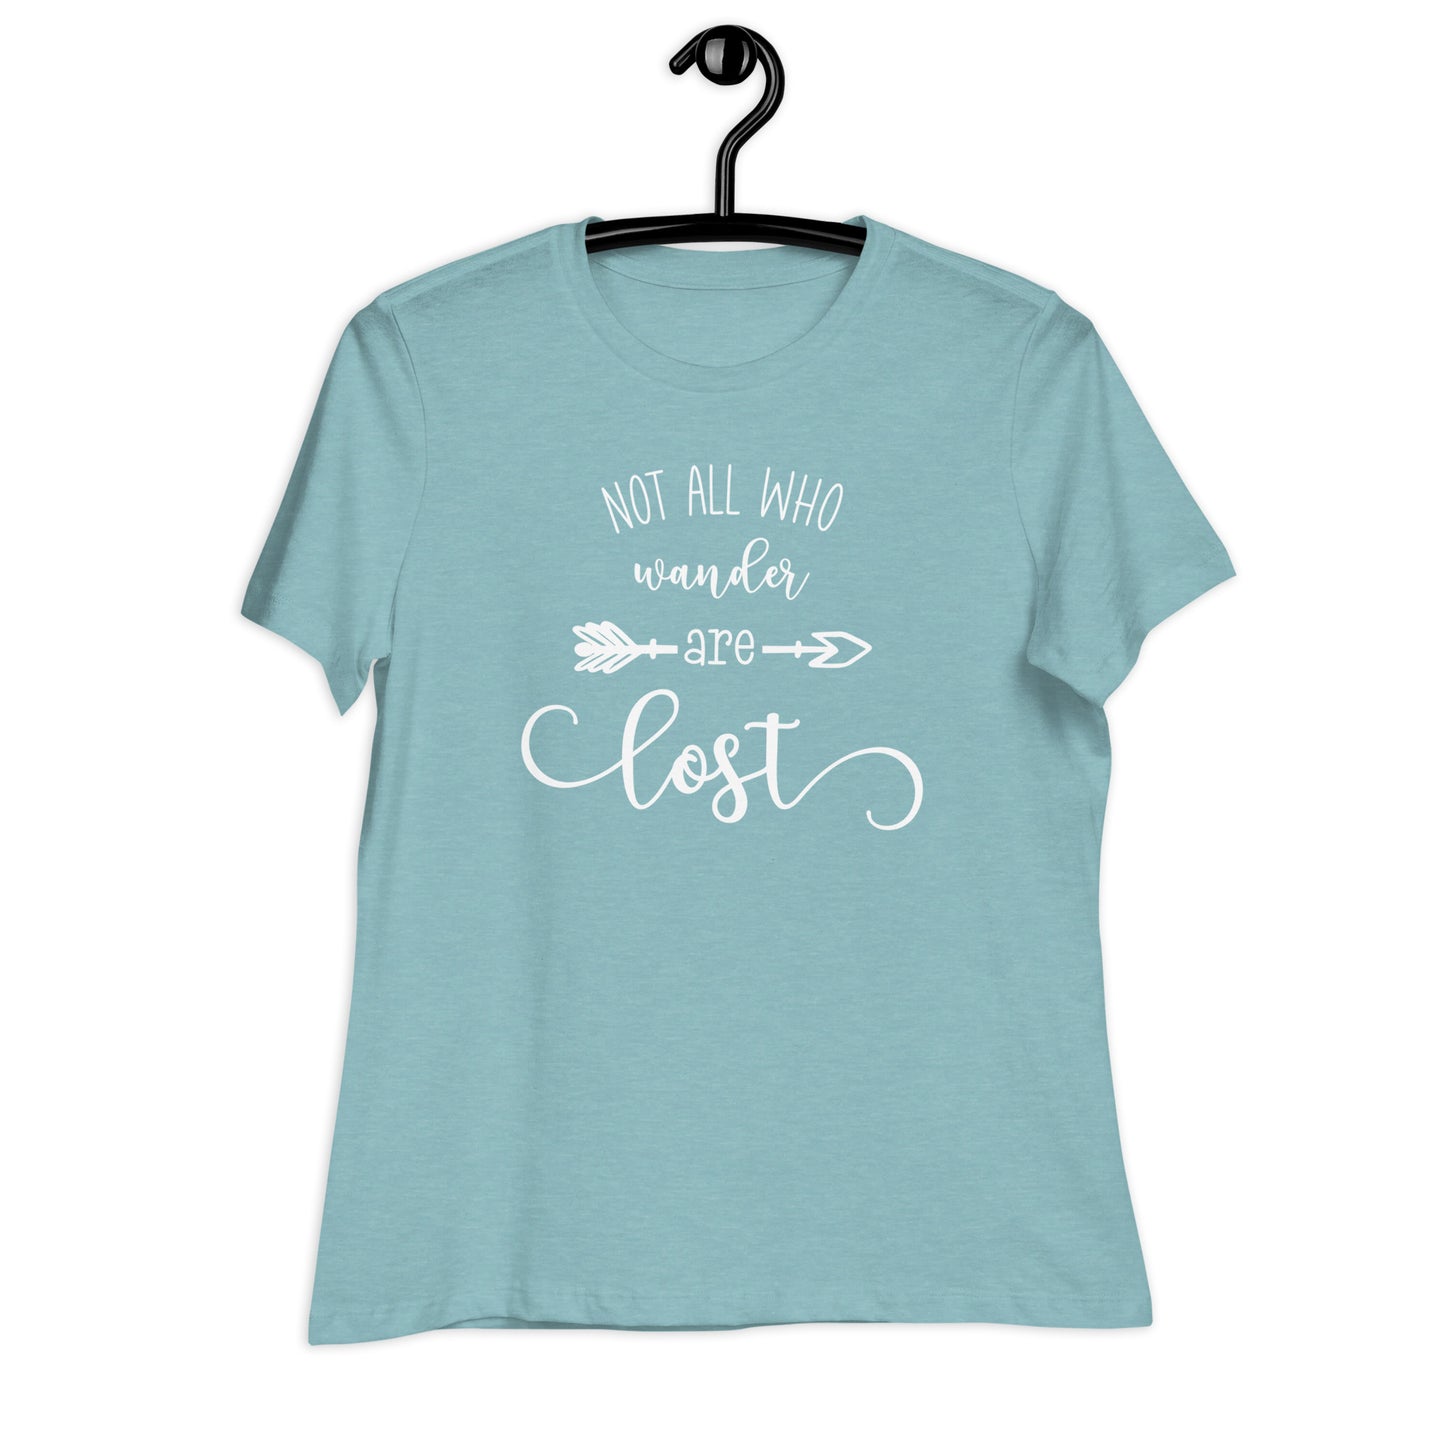 Not All Who Wander Are Lost Women's Relaxed T-Shirt